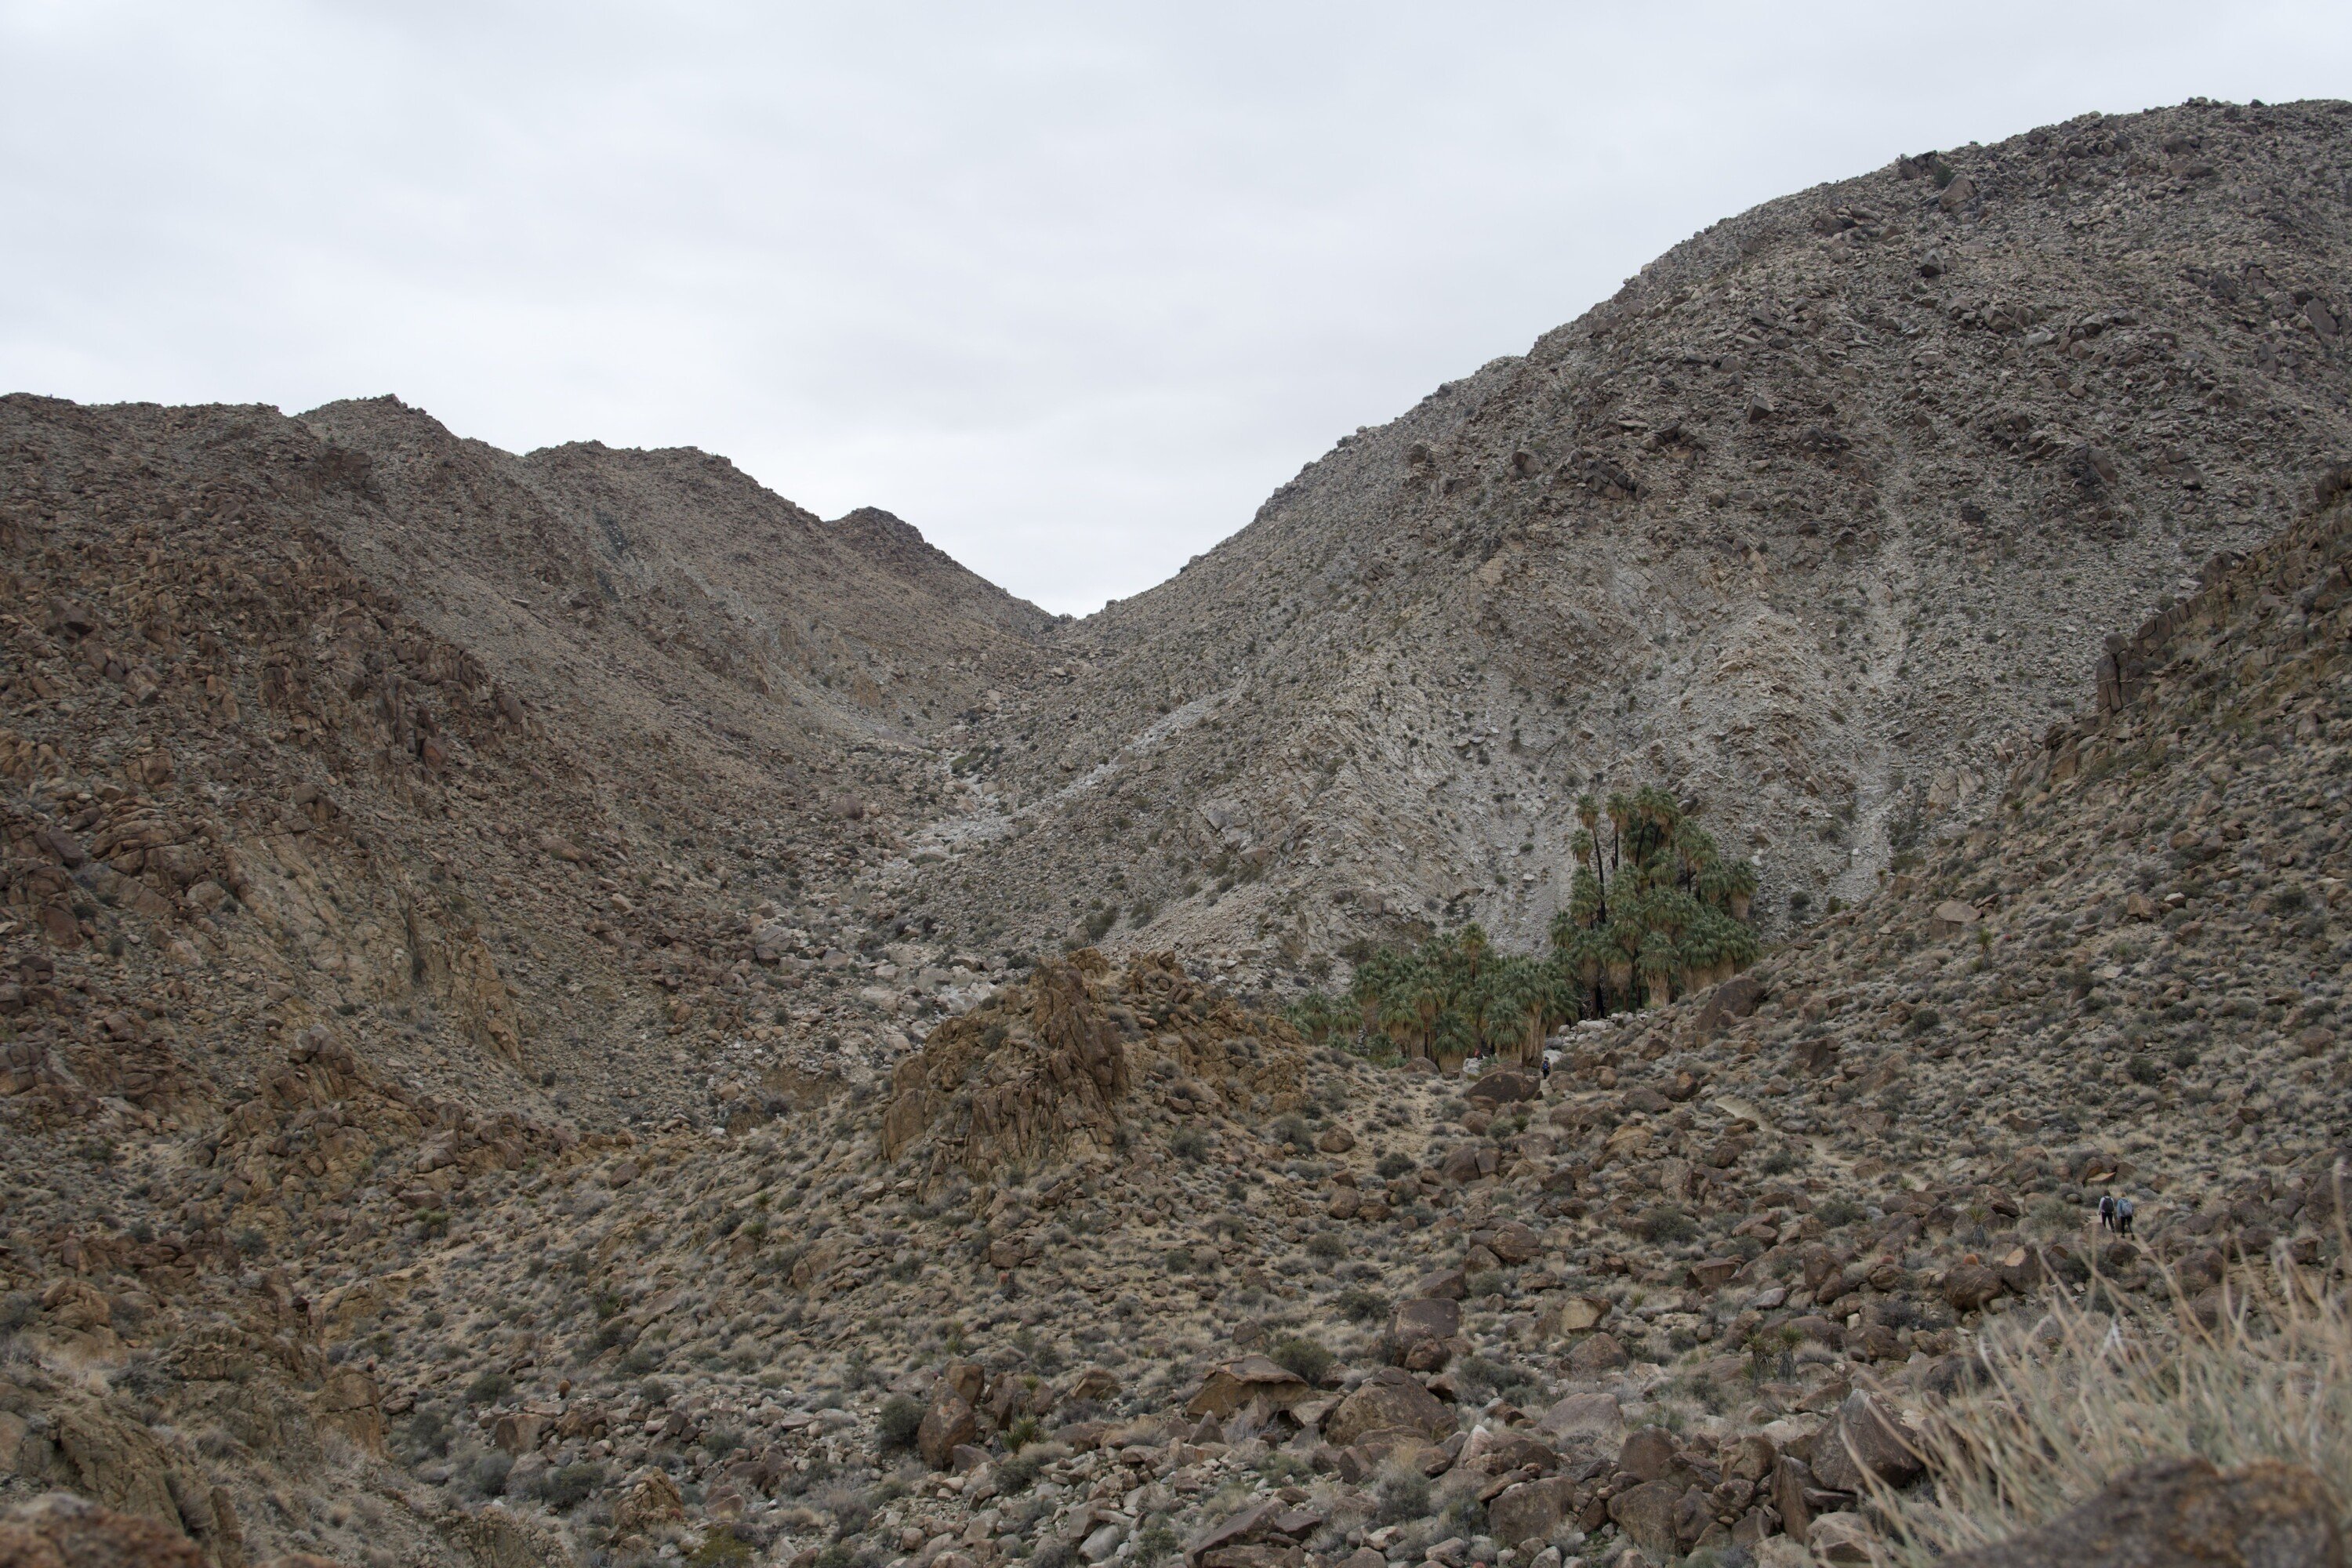 The 49 Palms Oasis Trail in Joshua Tree National Park